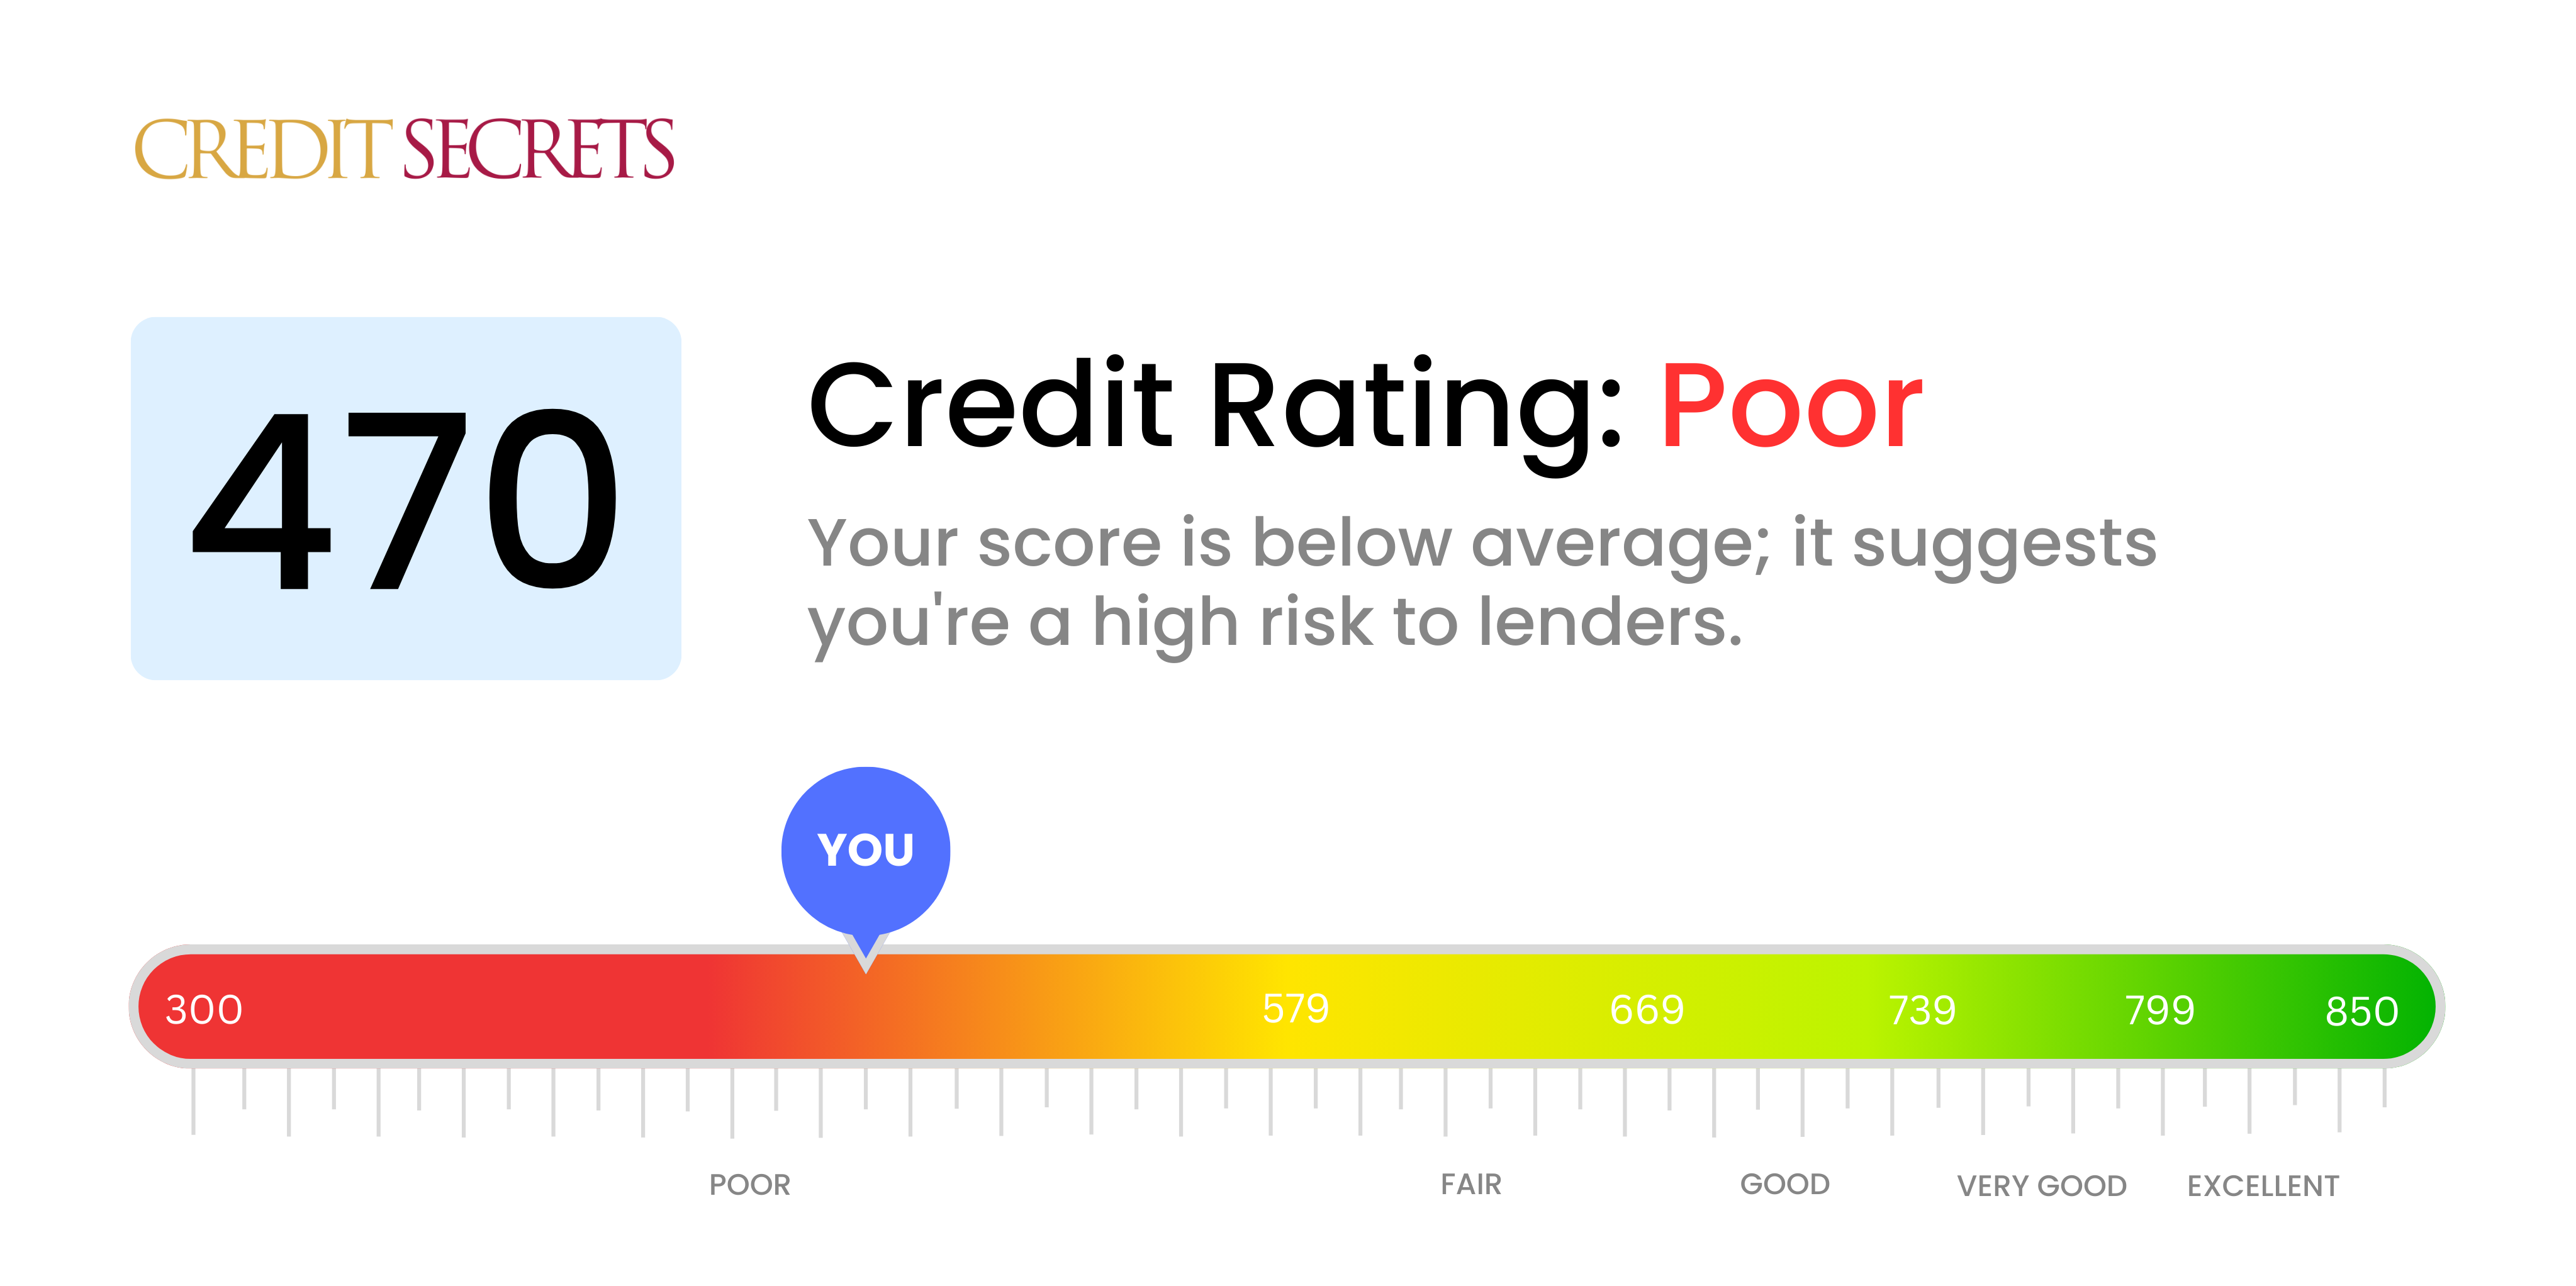 Is 470 a good credit score?